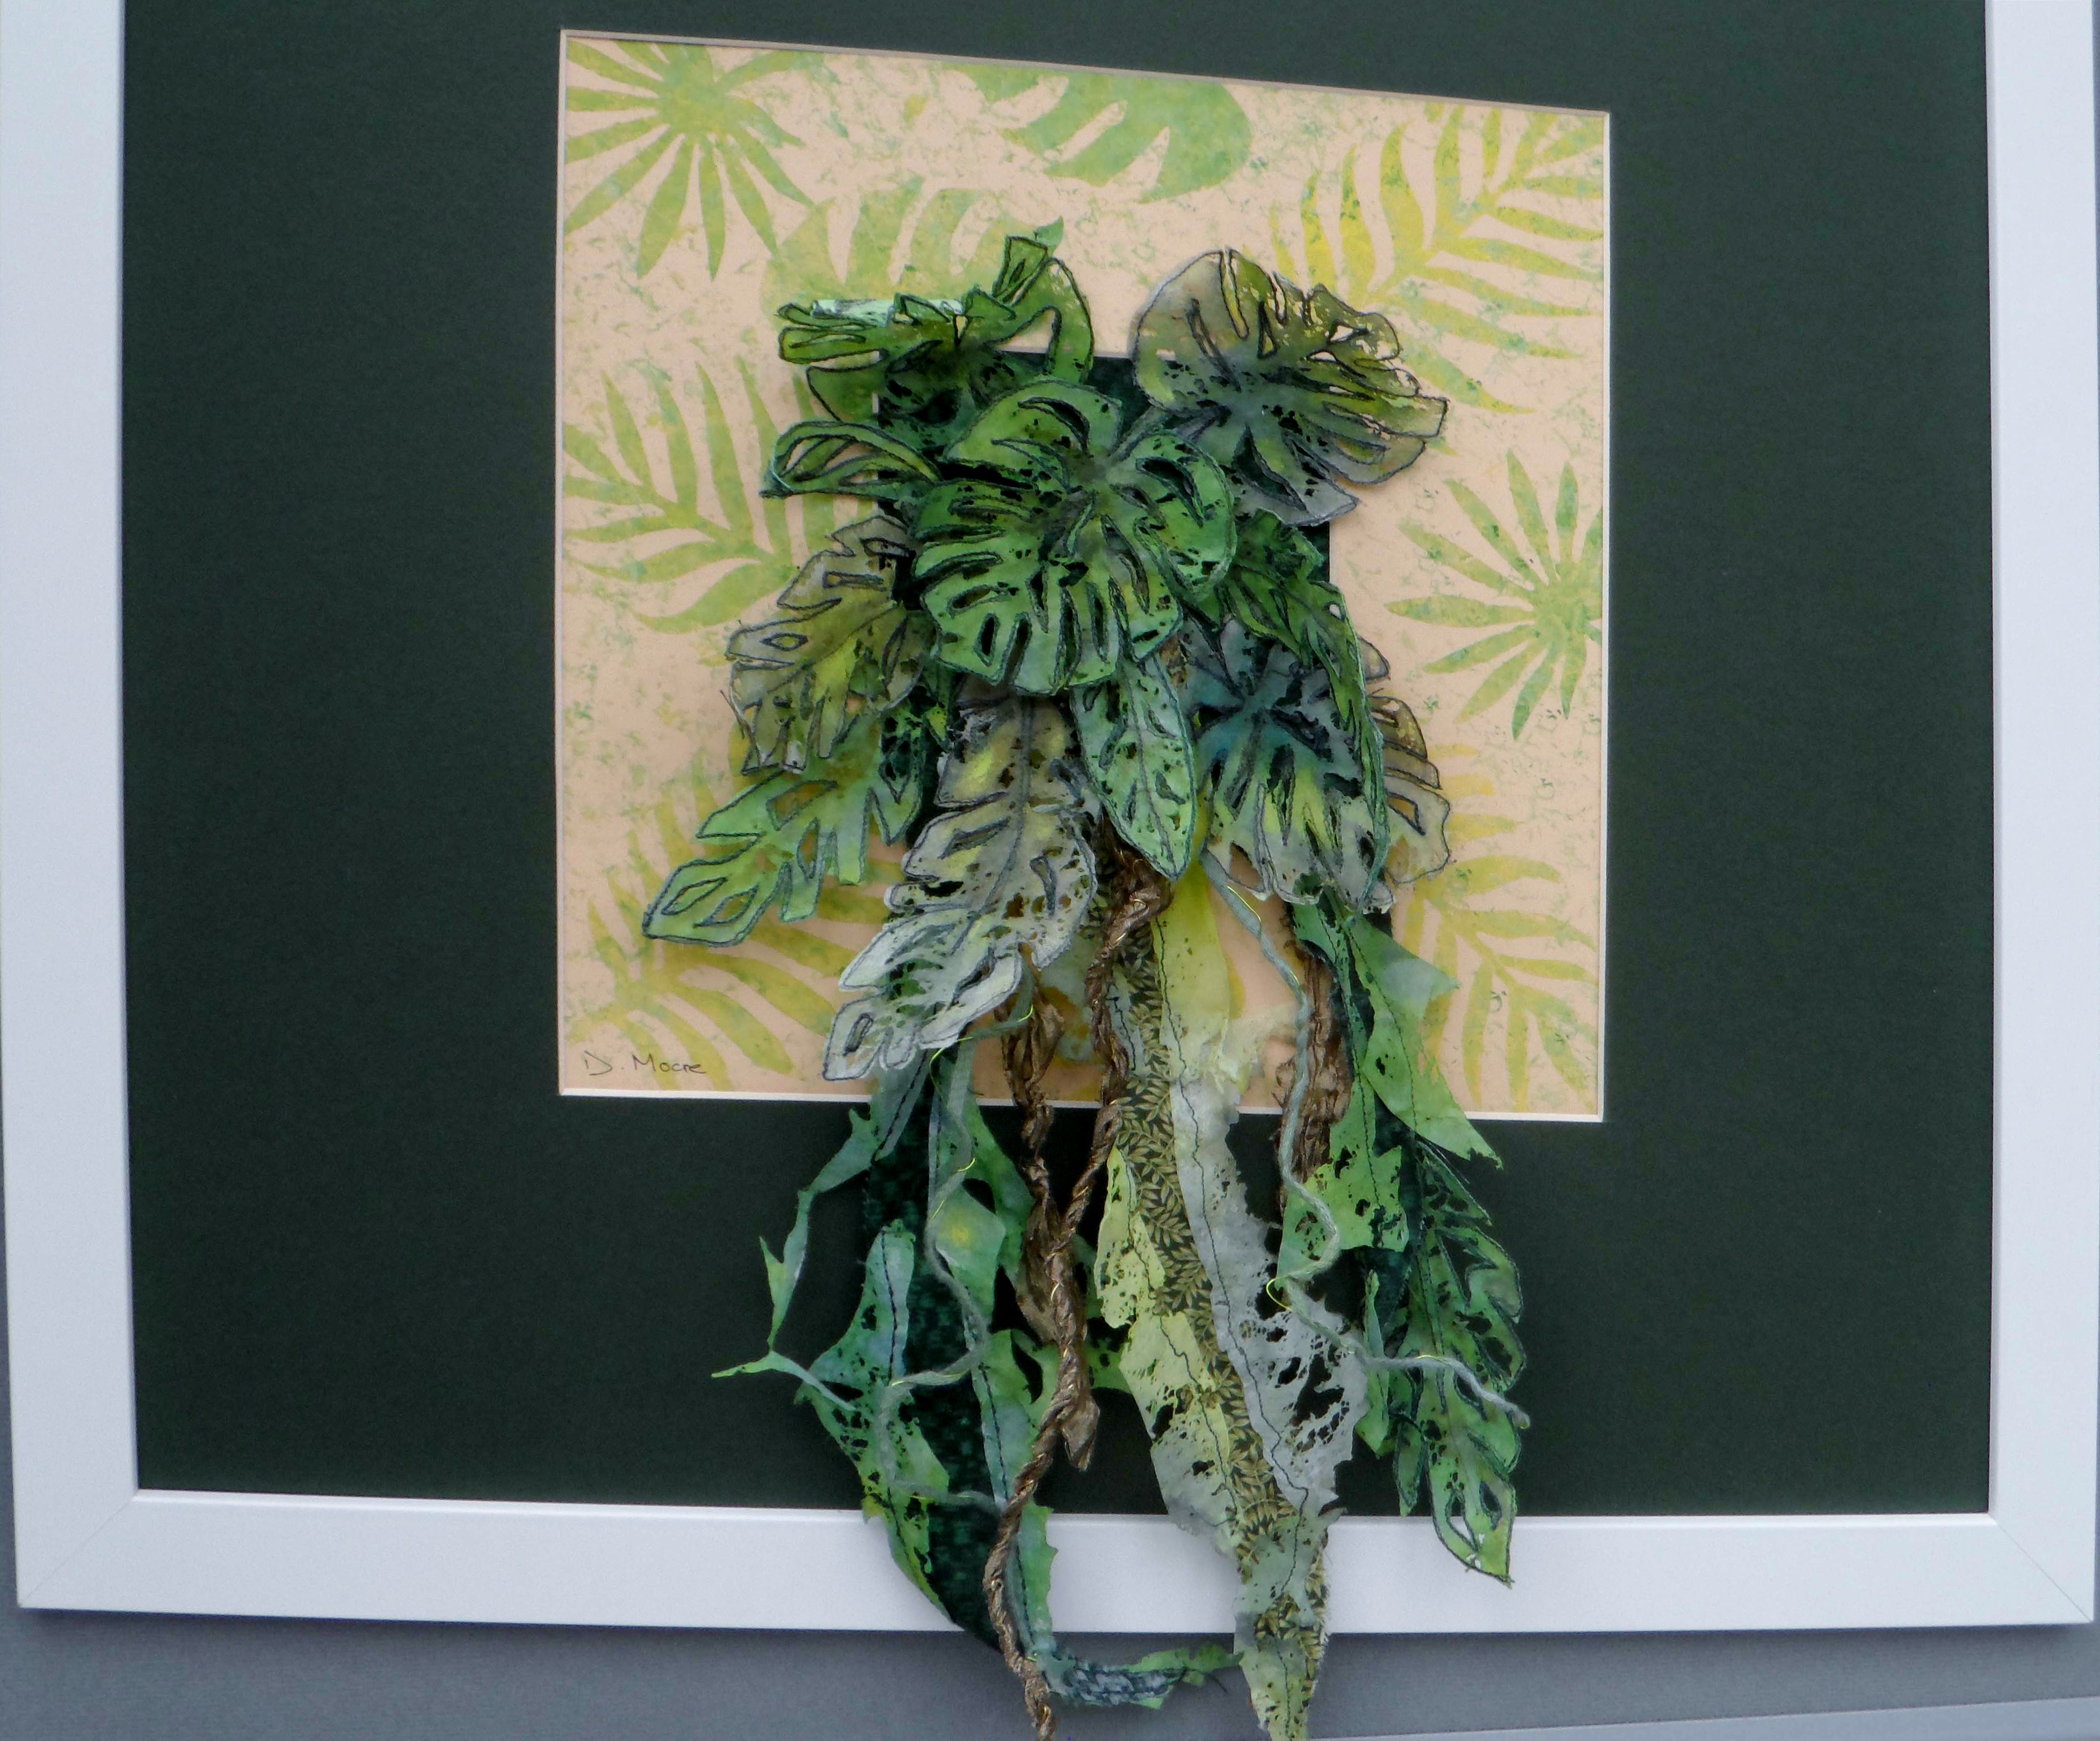 PROFUSION OF LEAVES by Diane Moore, dyed, painted and distressed Lutrador, machine stitching, Contemporary Threads exhibition, Sefton Palm House, Feb 2022